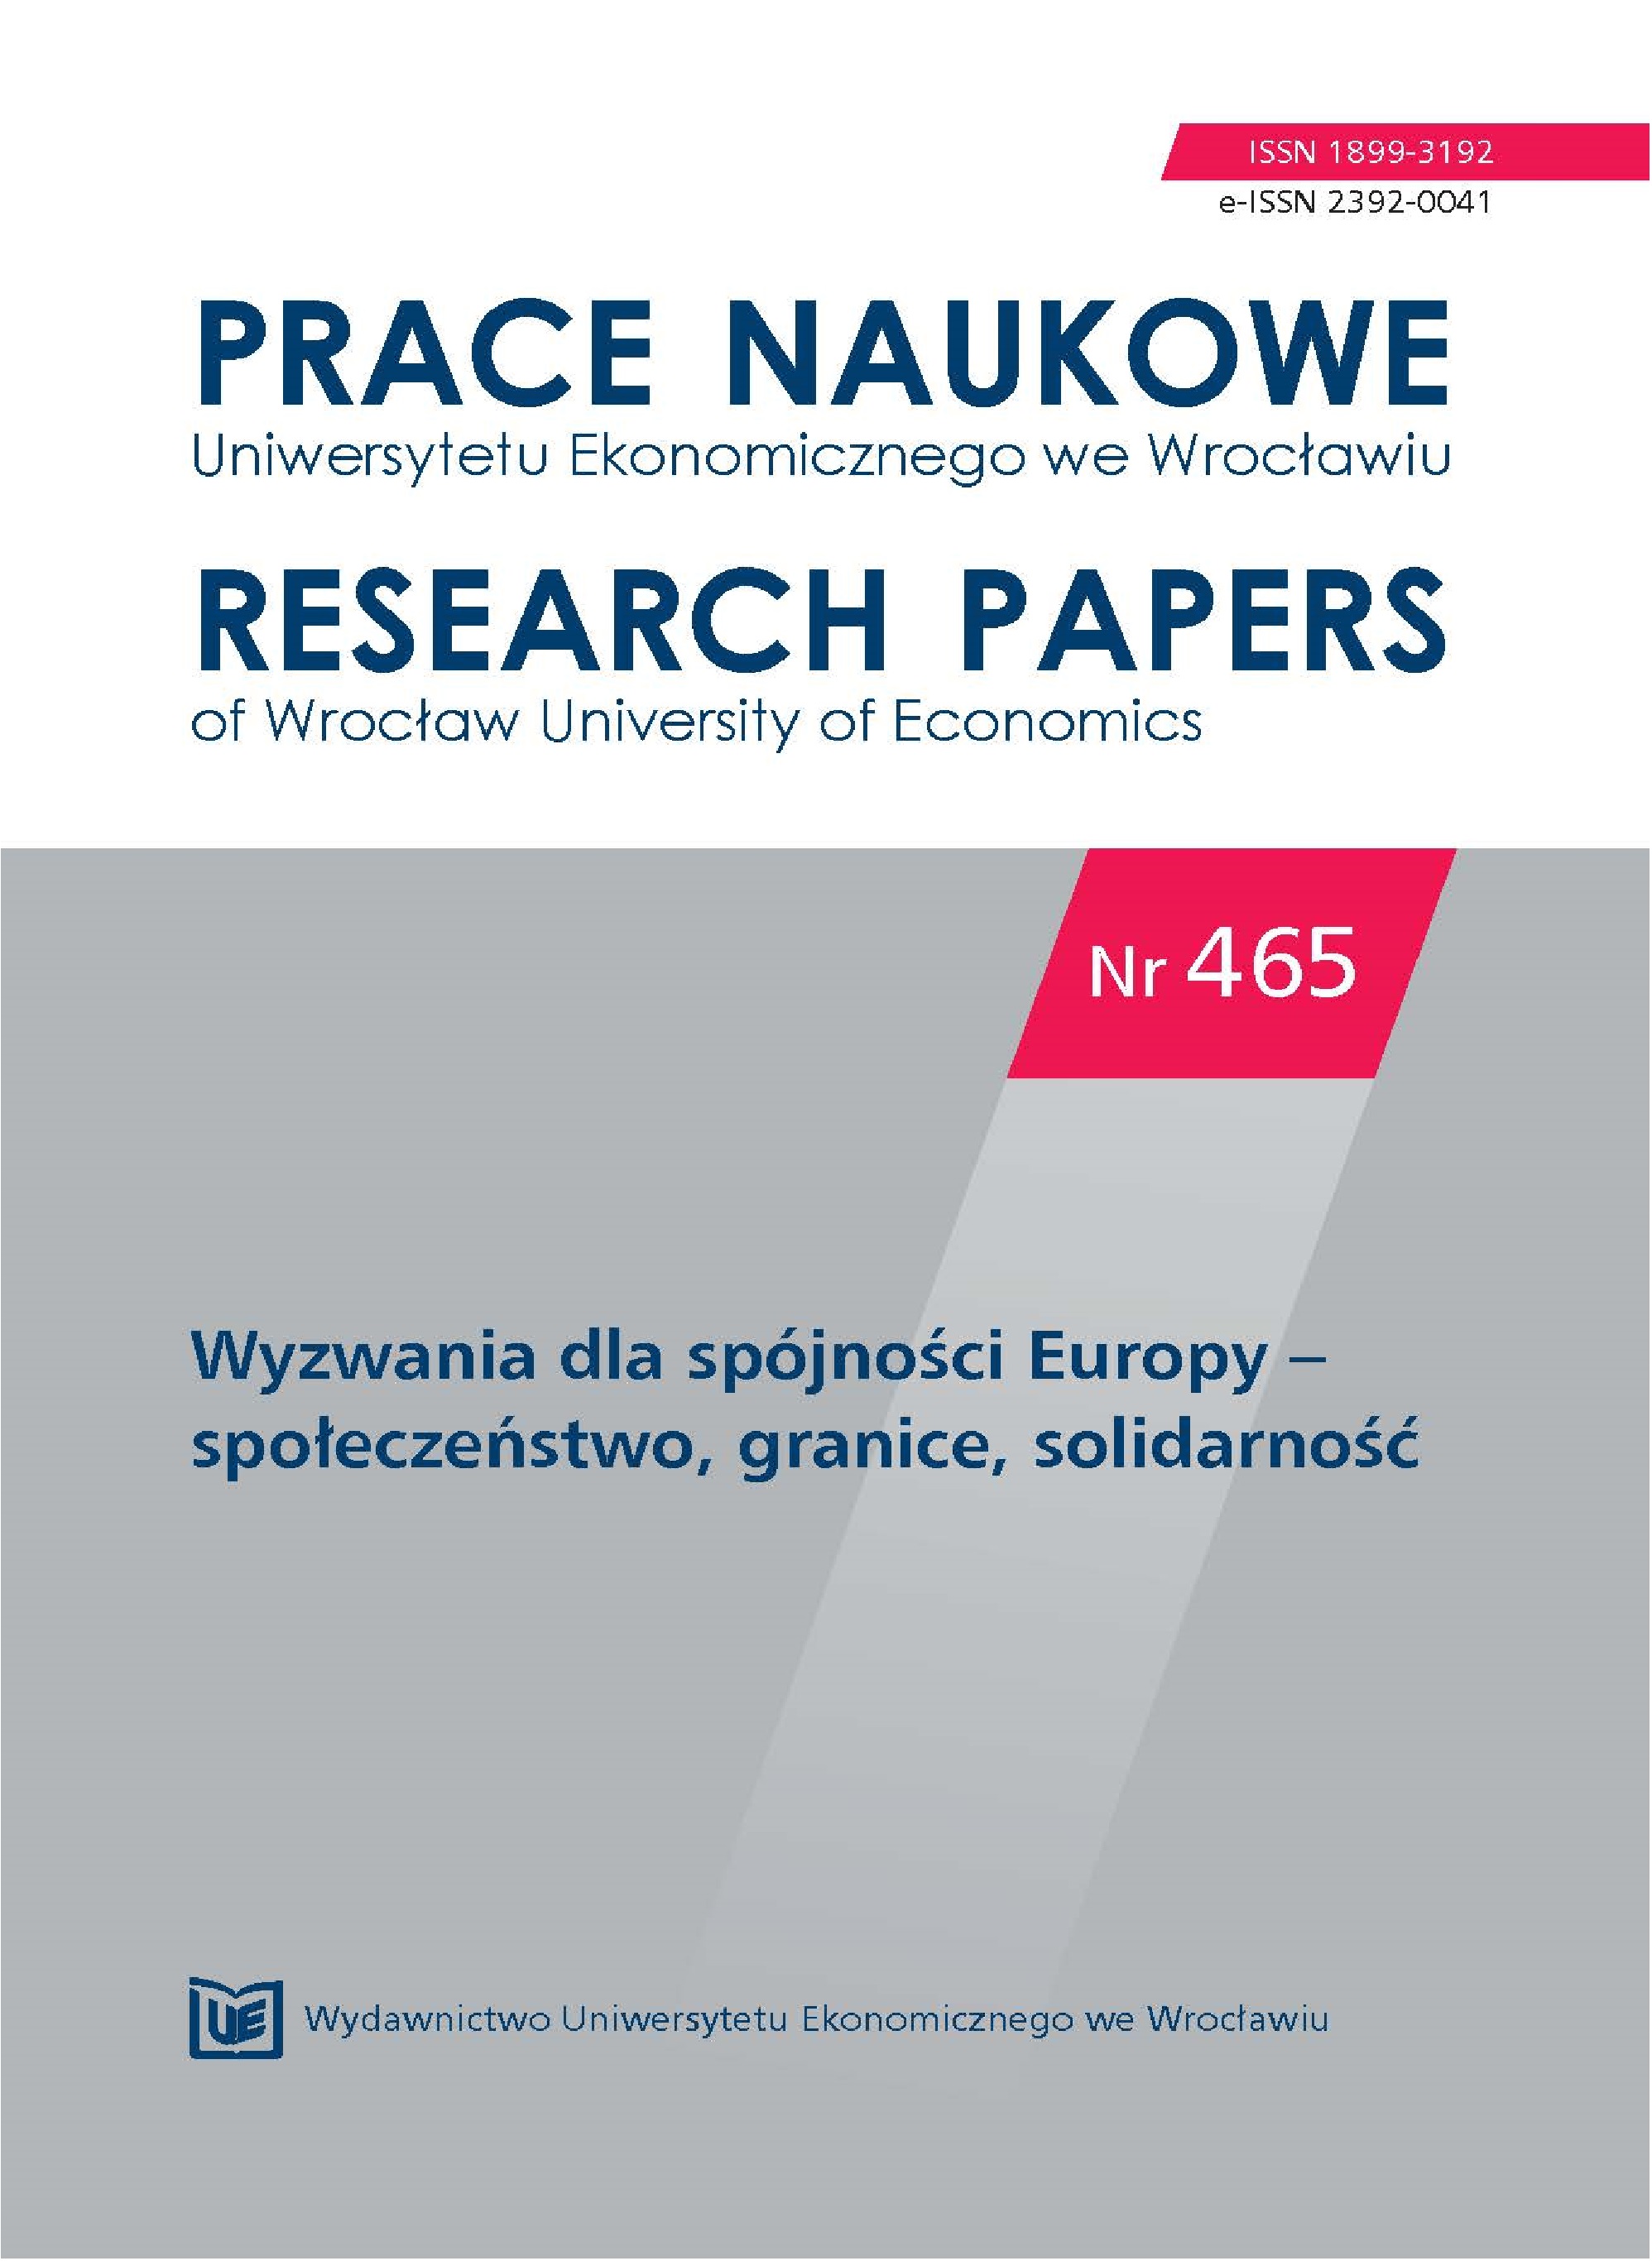 Changes of the structures of employment in Poland
vs. the spatial stability of the system Cover Image